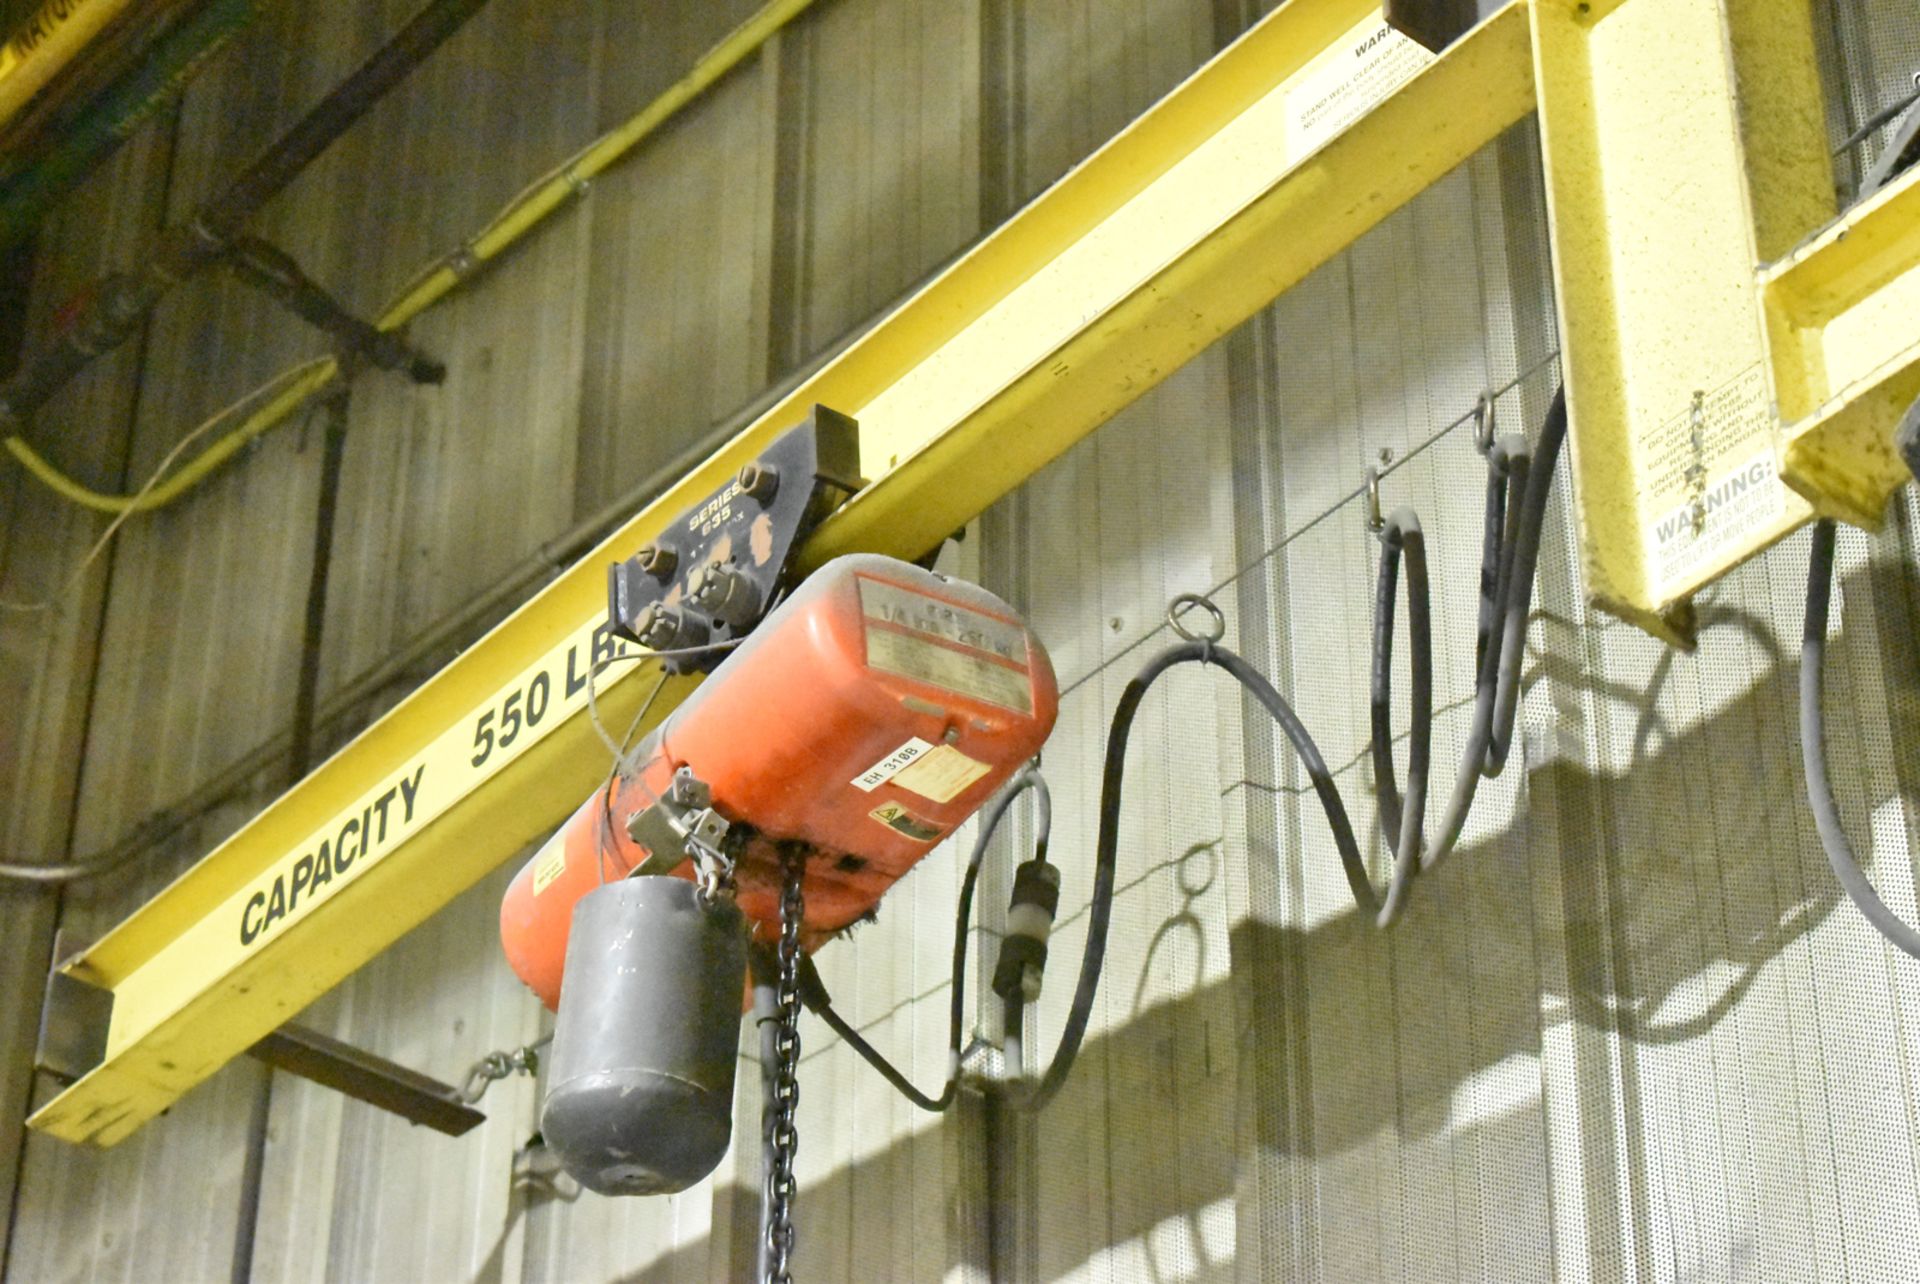 1000 LB CAP. FREE STANDING JIB ARM WITH APPROX. 7' SPAN, APPROX. 11' UNDER HOOK, CM LODESTAR 1/2 TON - Image 3 of 3